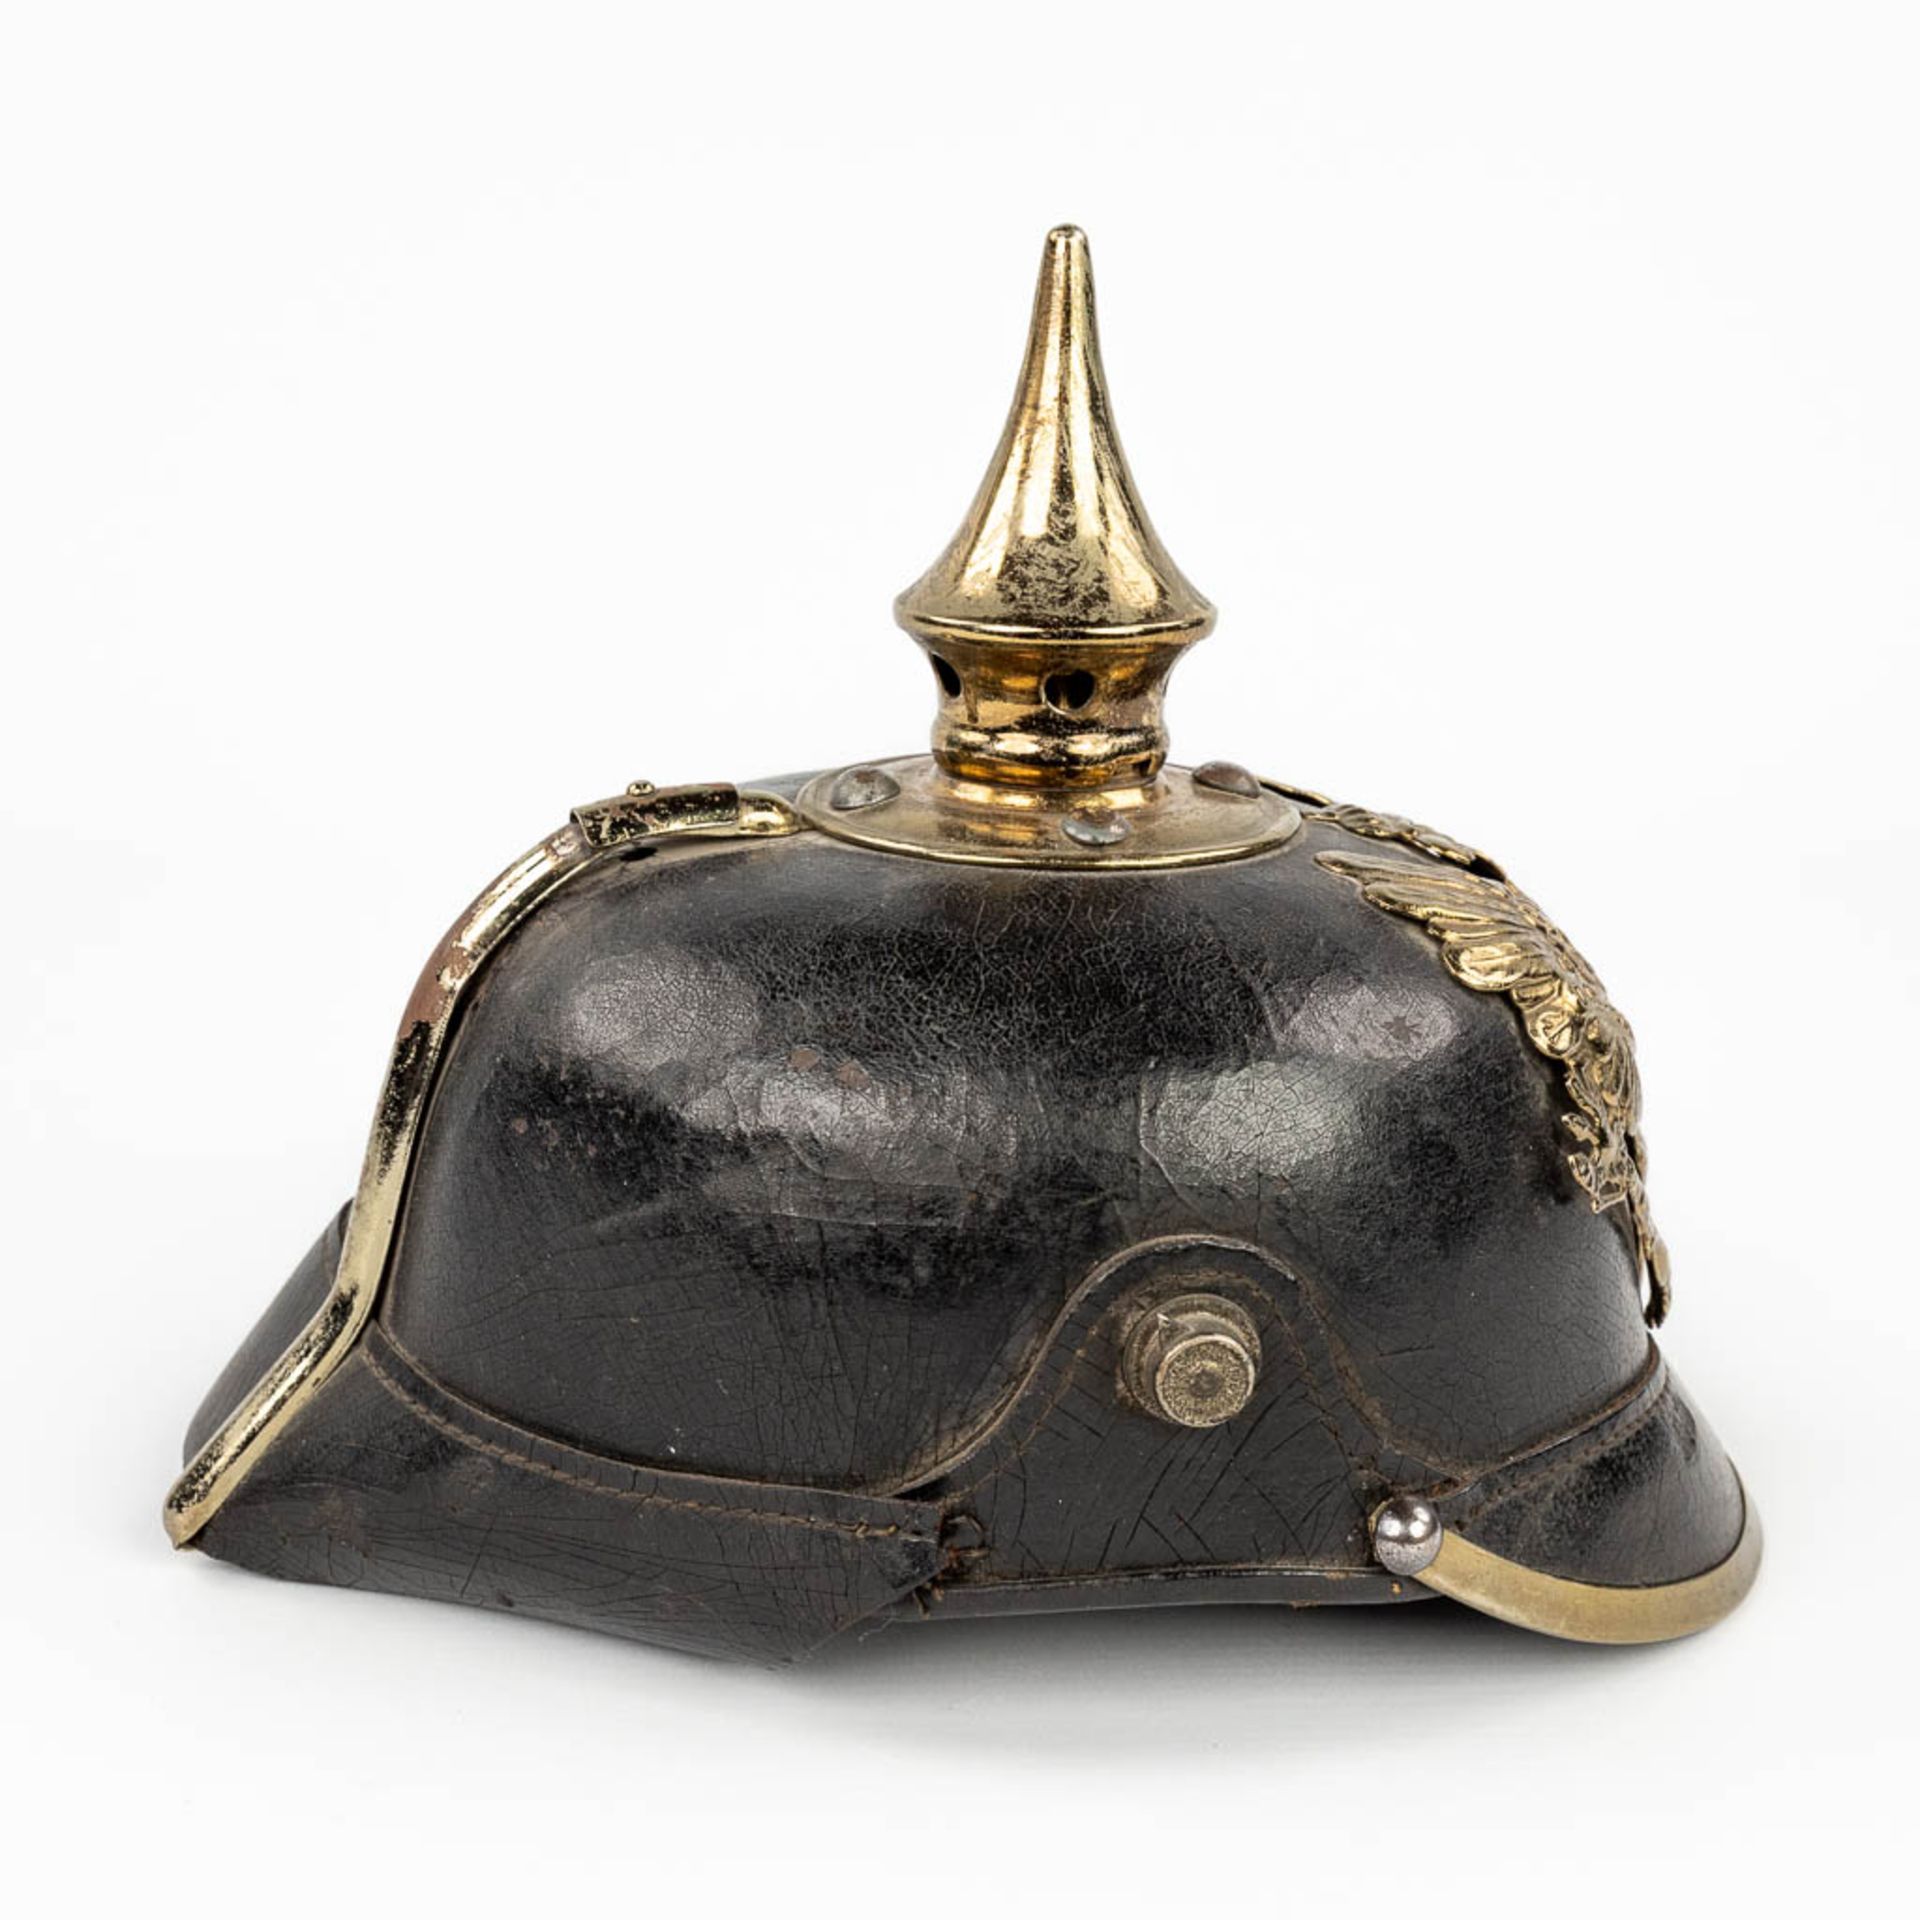 An antique German 'Pickelhaube' decorated with an eagle. Dating 1914-1918. (L:25 x W:18 x H:21 cm) - Bild 5 aus 17